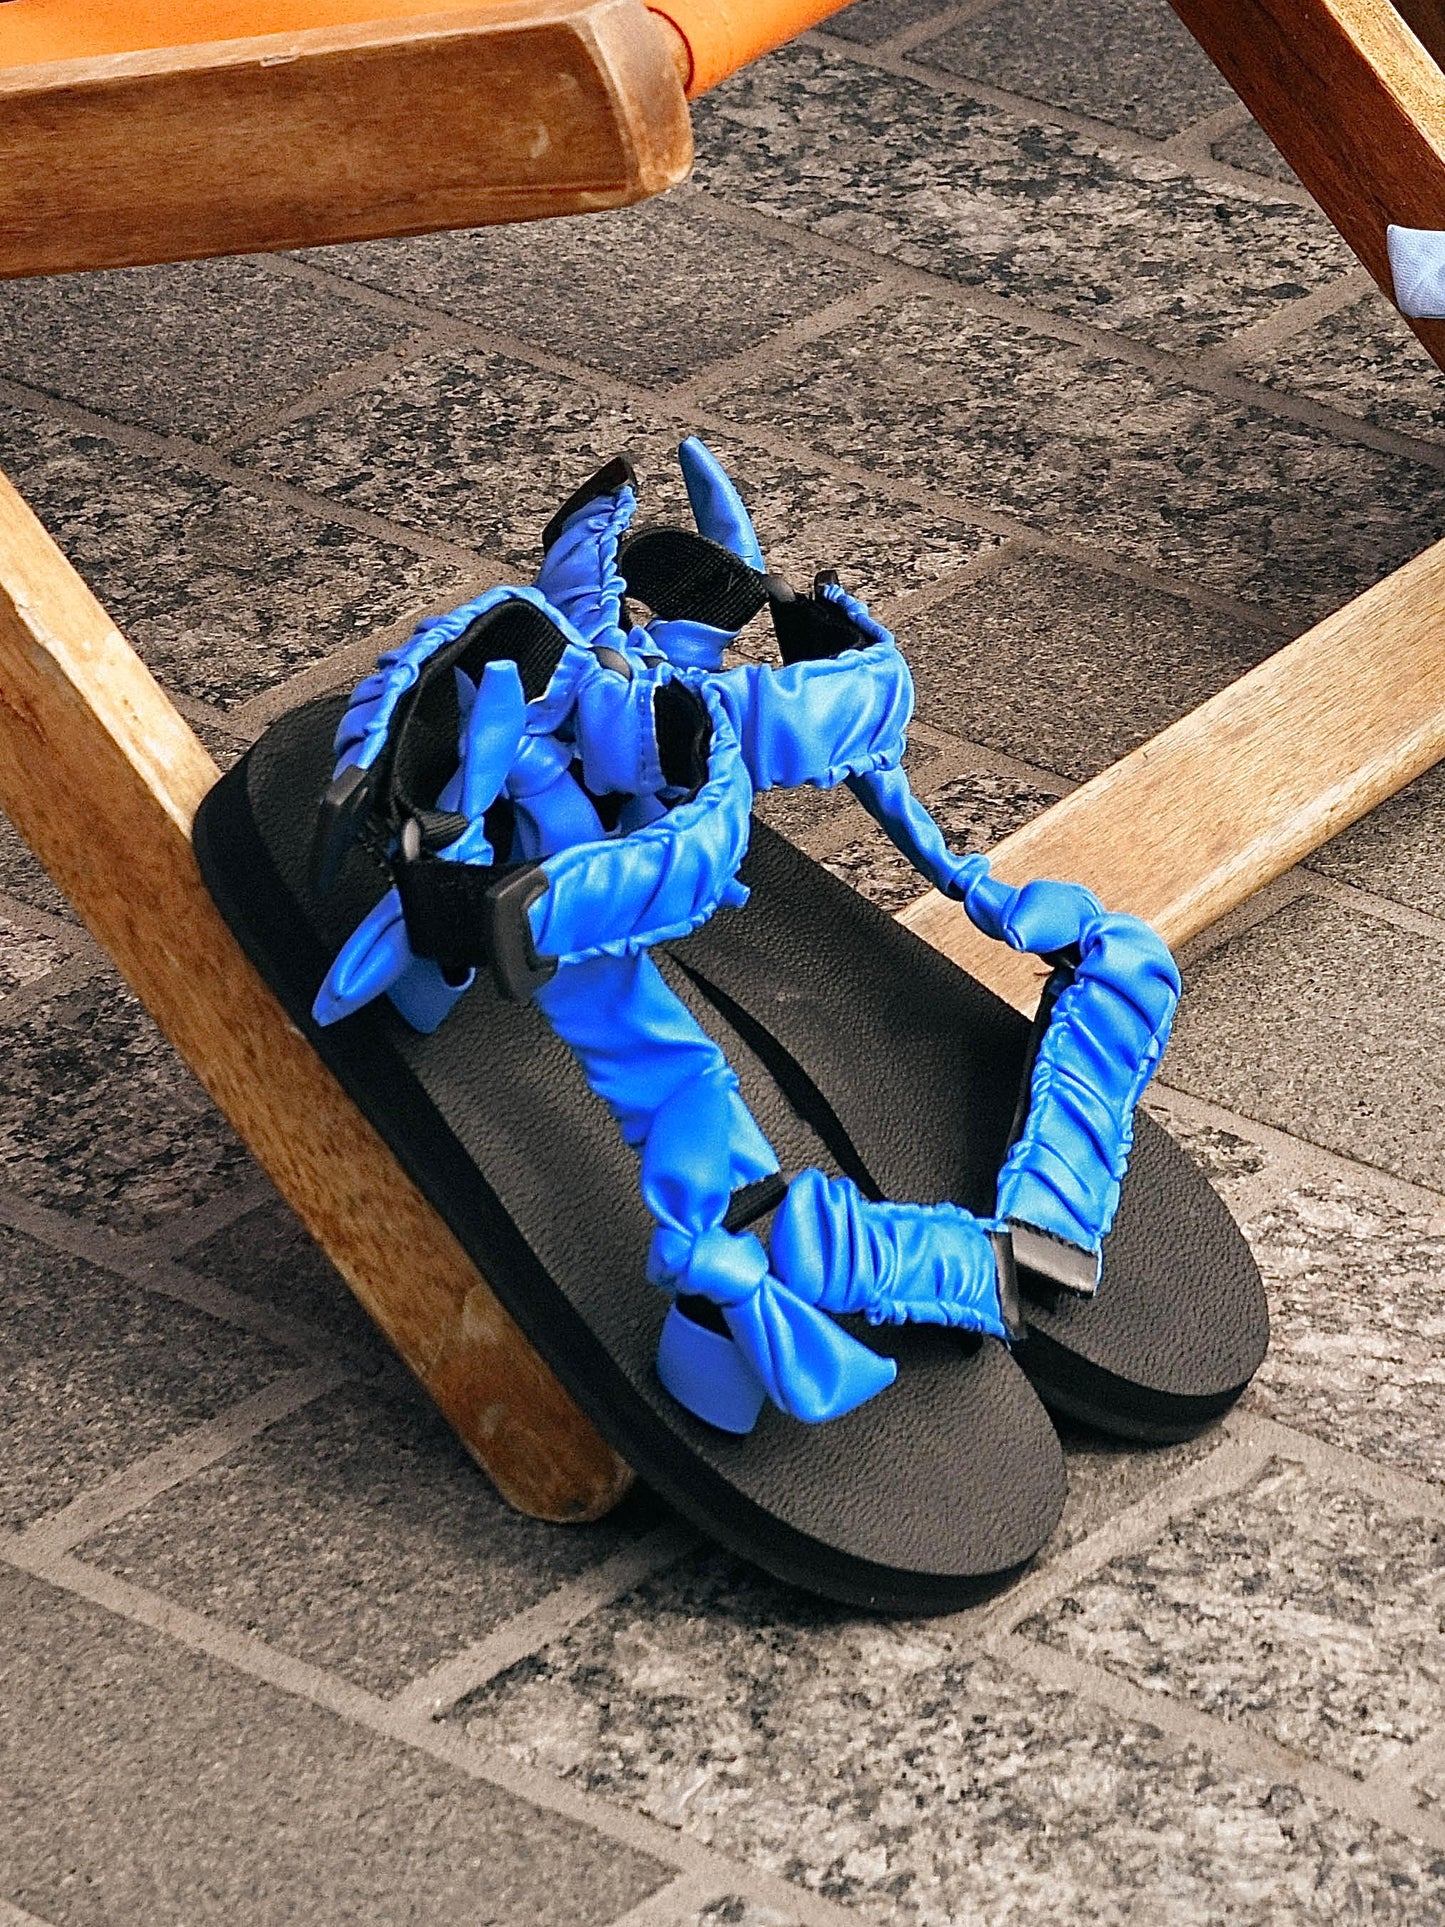 
                  
                    JaeDals, Sandals, summer beach, adventure,  electric blue, leather PVC, UNISEX WOMEN MEN, Water-proof, Anti-slip, Arch Support, Light weight, Extremely comfortable, Perfect traveling, sole-mate.
                  
                